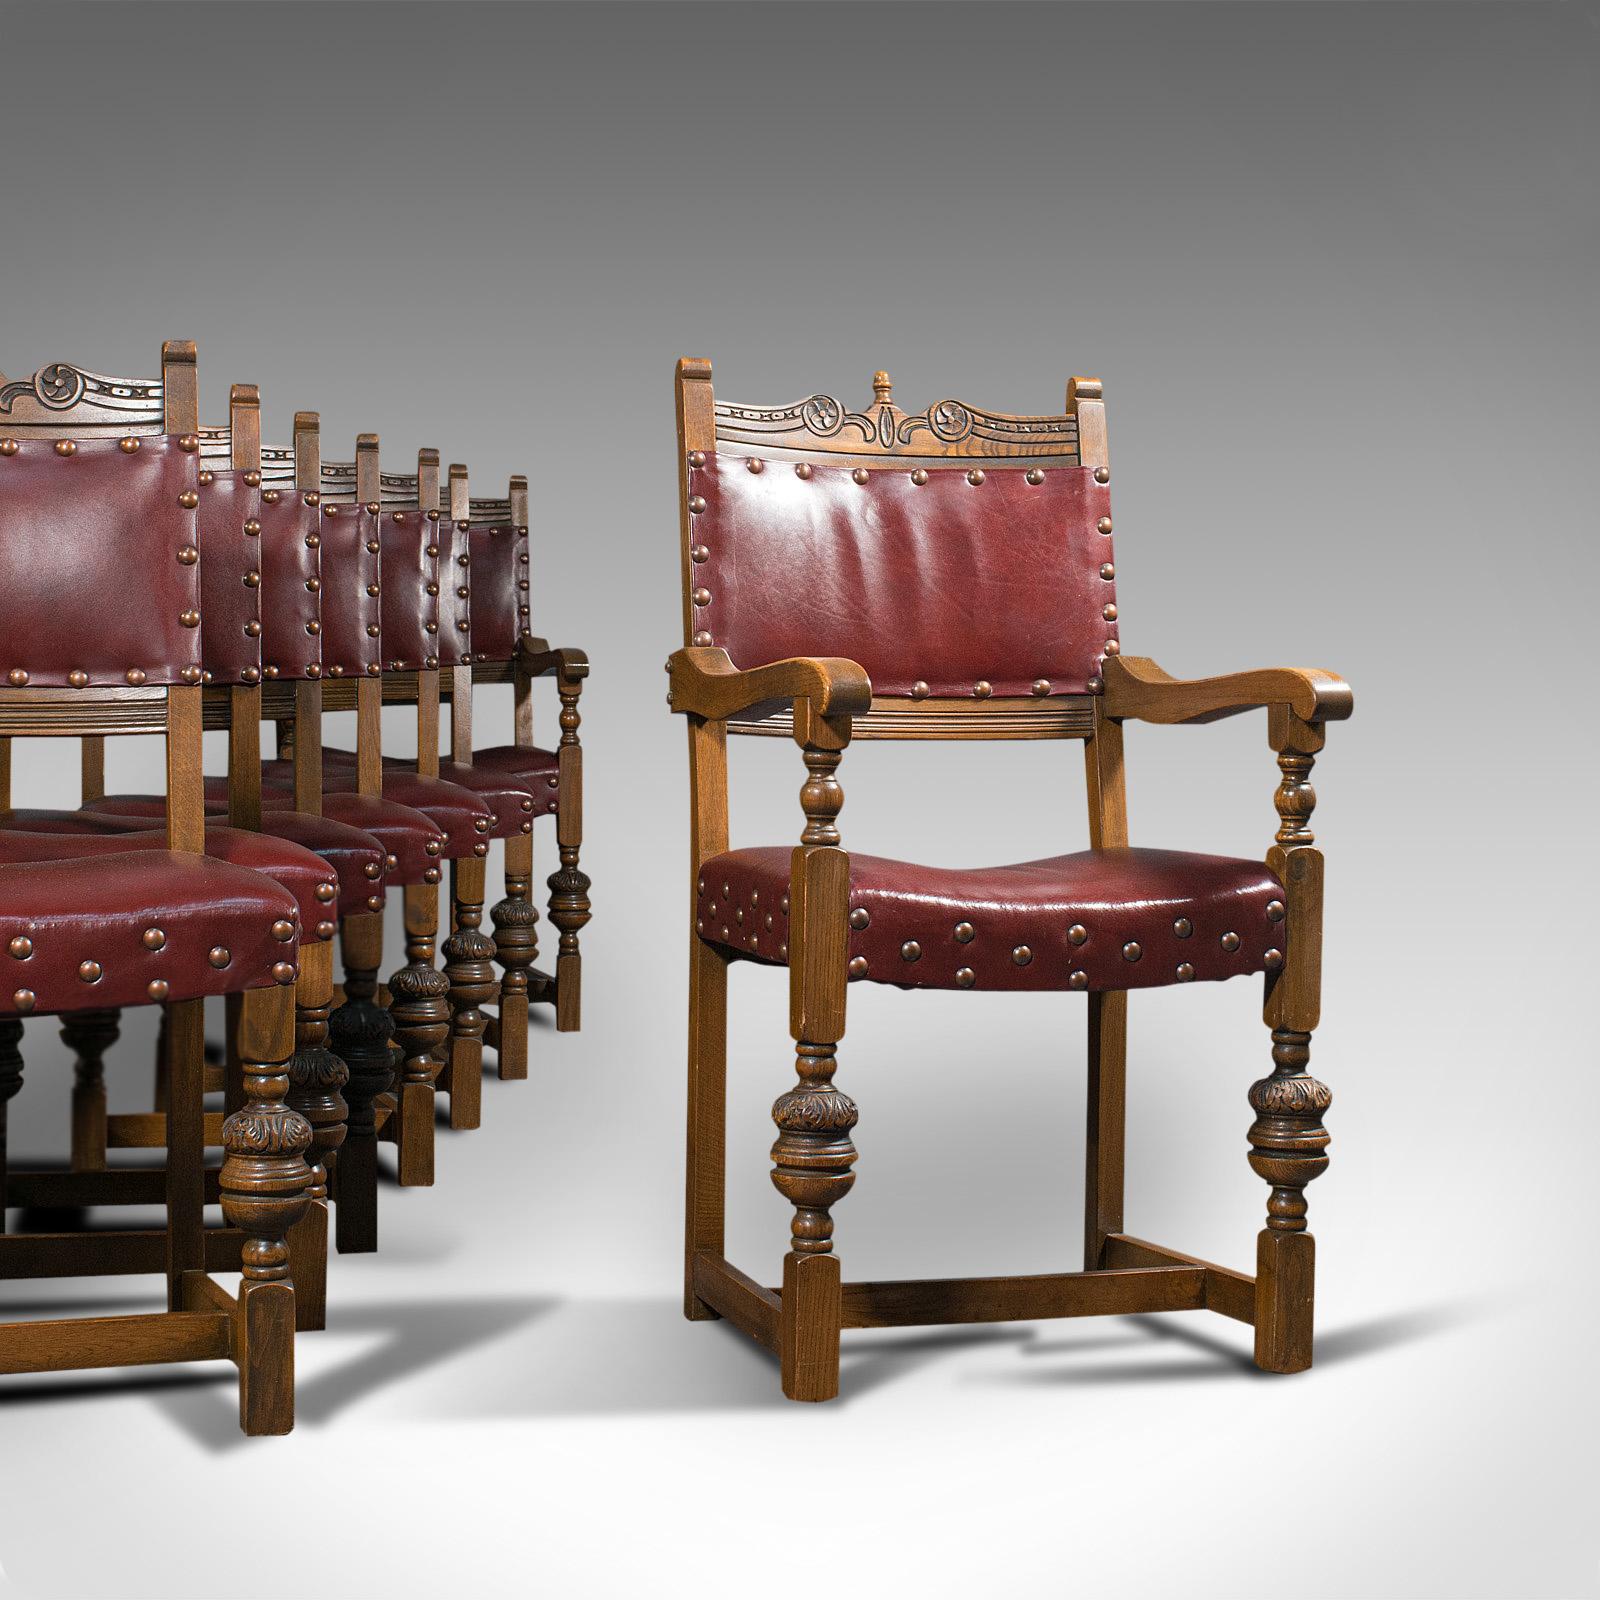 This is a vintage set of 8 dining chairs. An English, quality oak and leather suite in Carolean revival taste, dating to the mid-20th century, circa 1950.

Wonderfully regal dining room set
Pair of dashing carvers for the heads of the